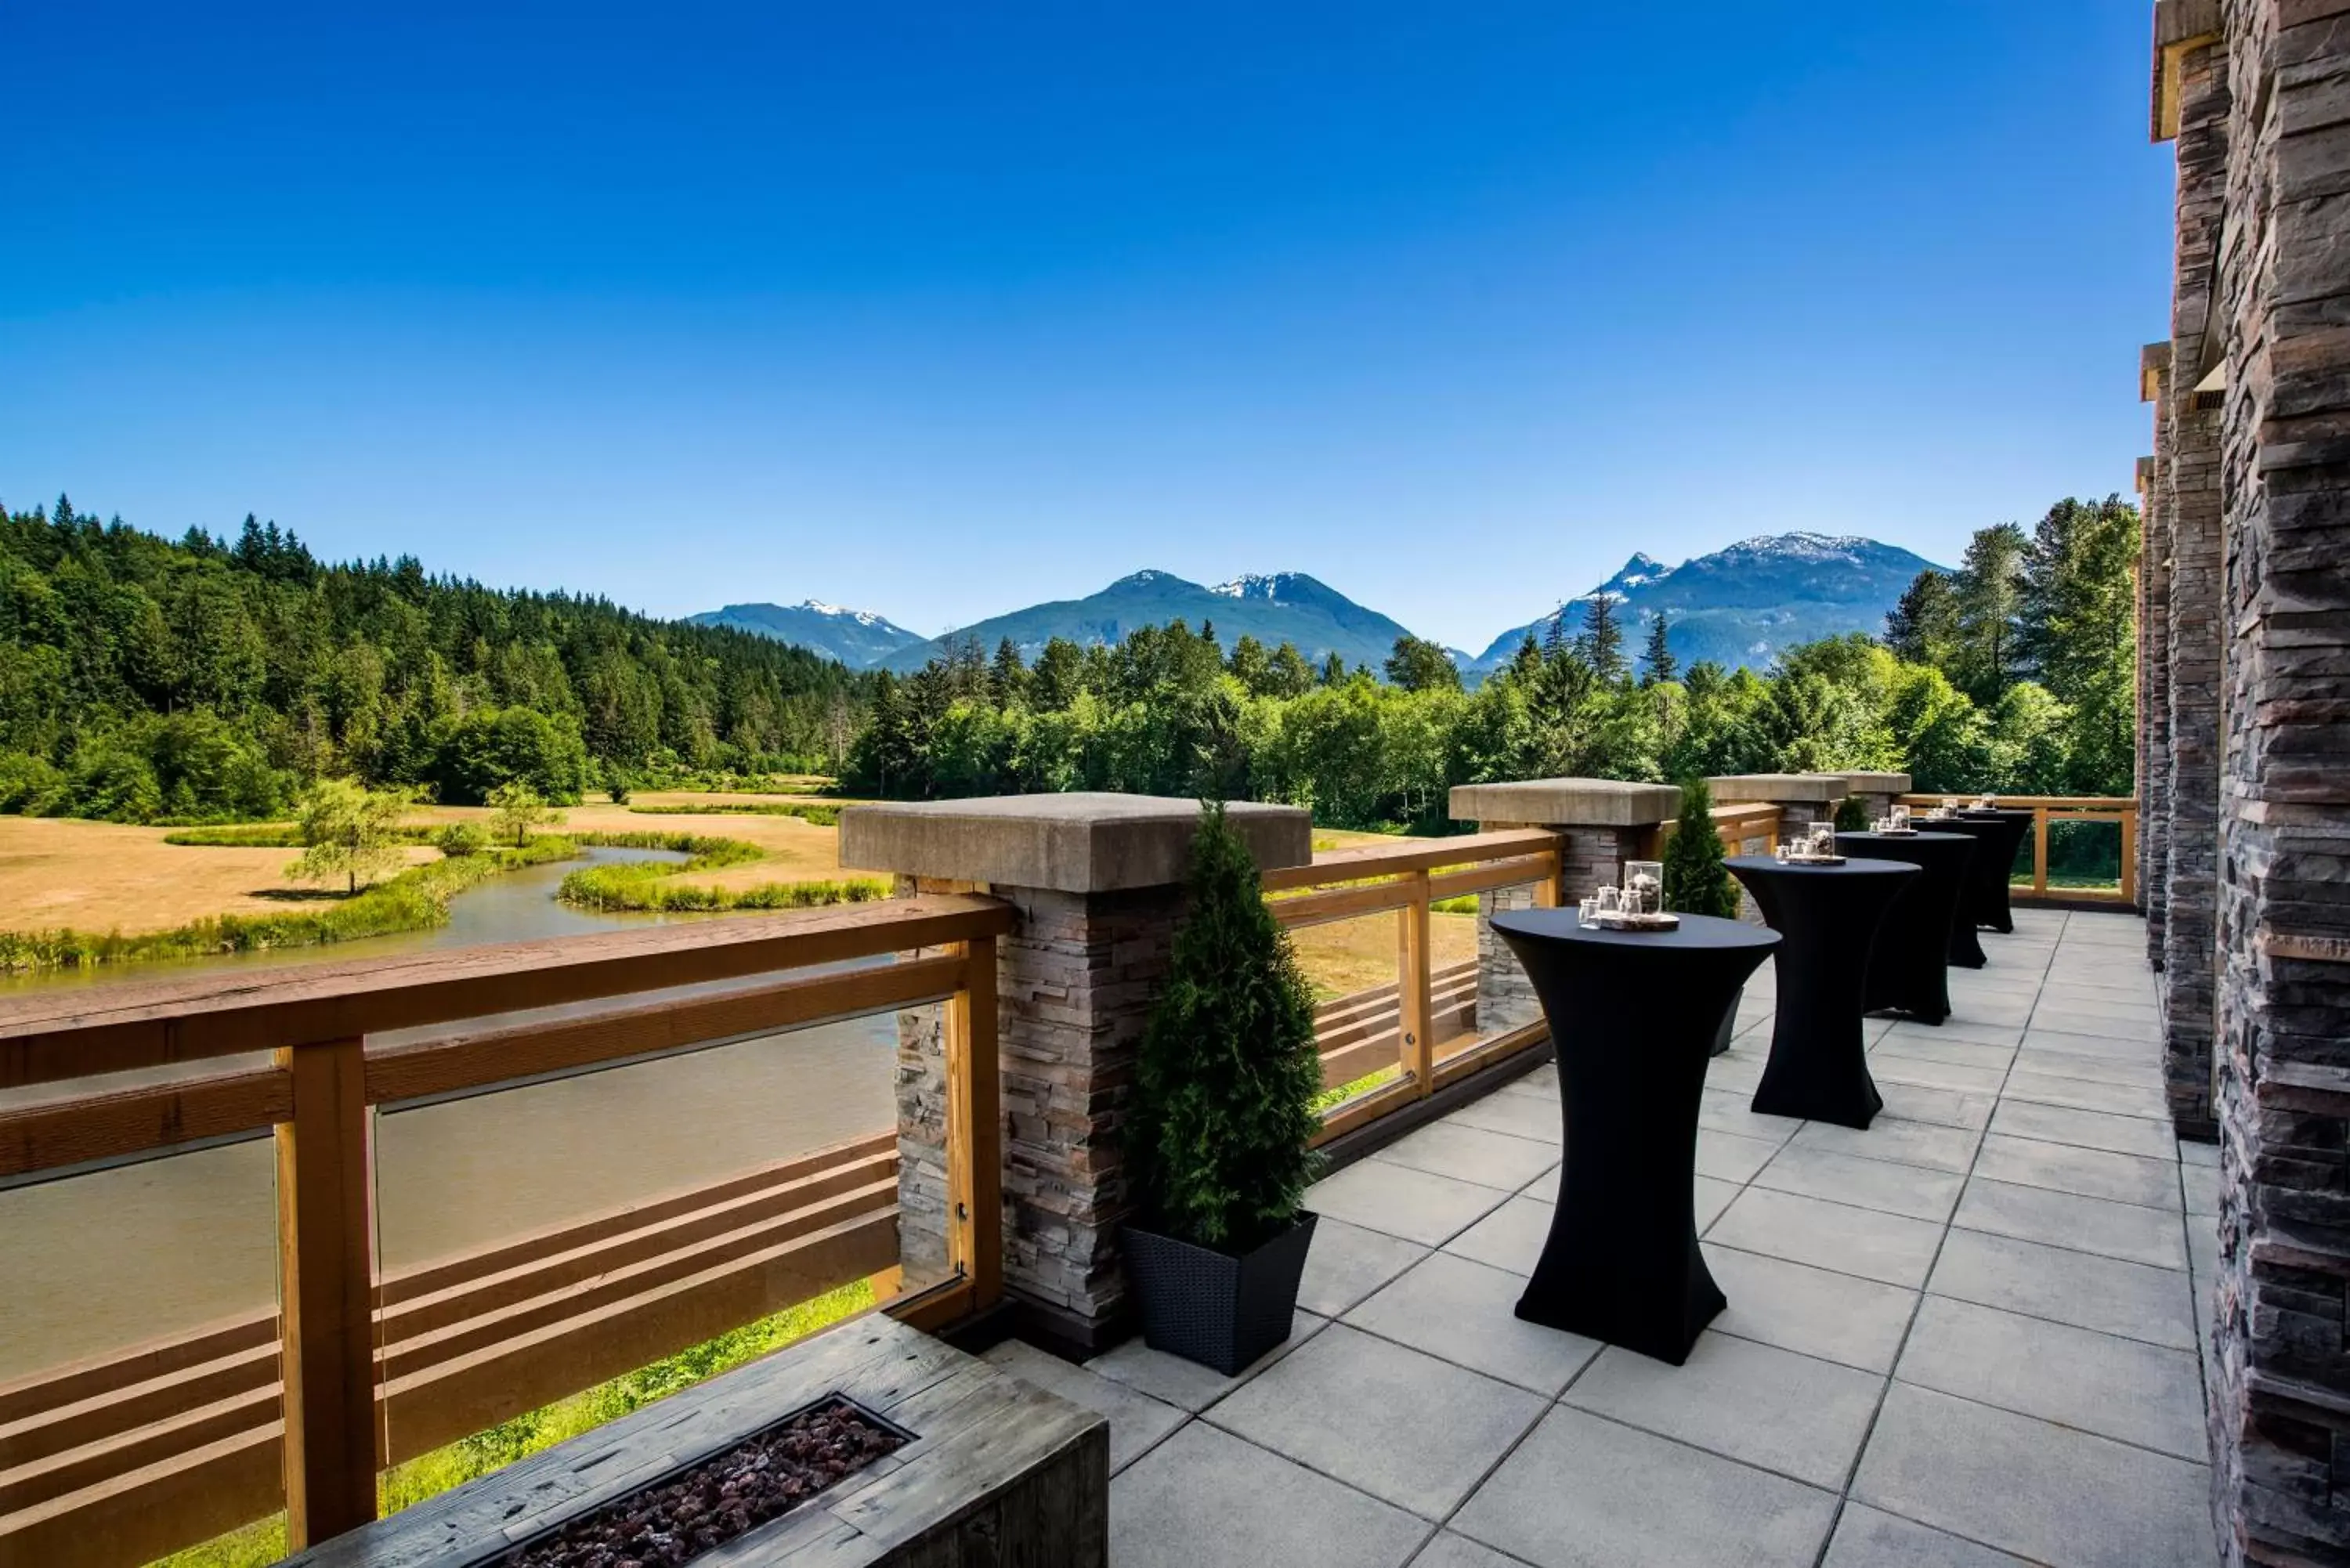 Patio, Mountain View in Executive Suites Hotel and Resort, Squamish